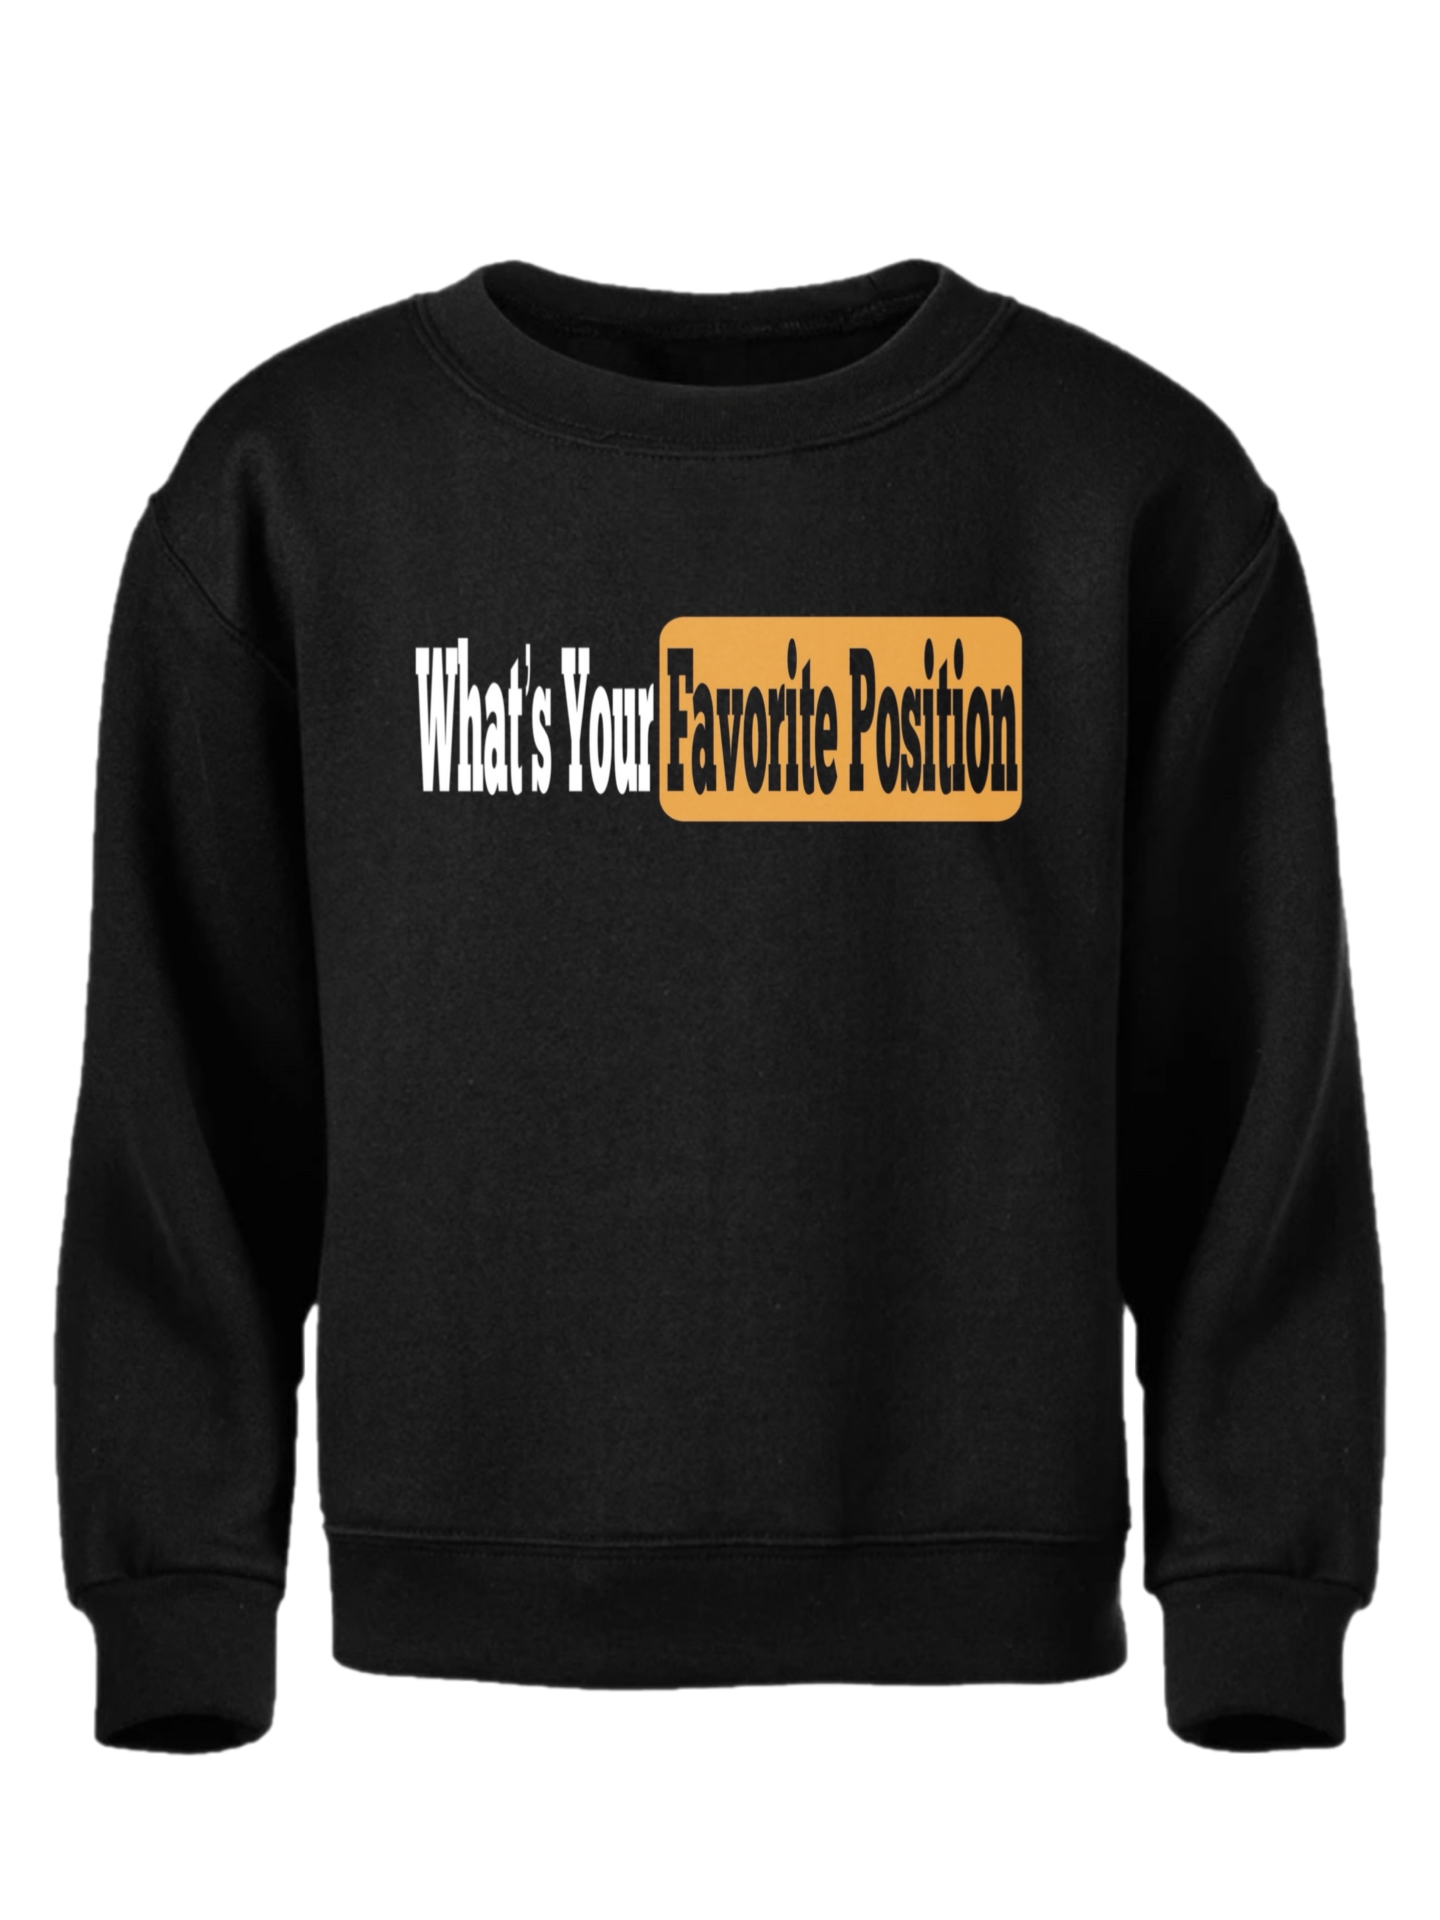 "What's your favorite position?" Israel Padilla sweatshirt with new orange design in black color